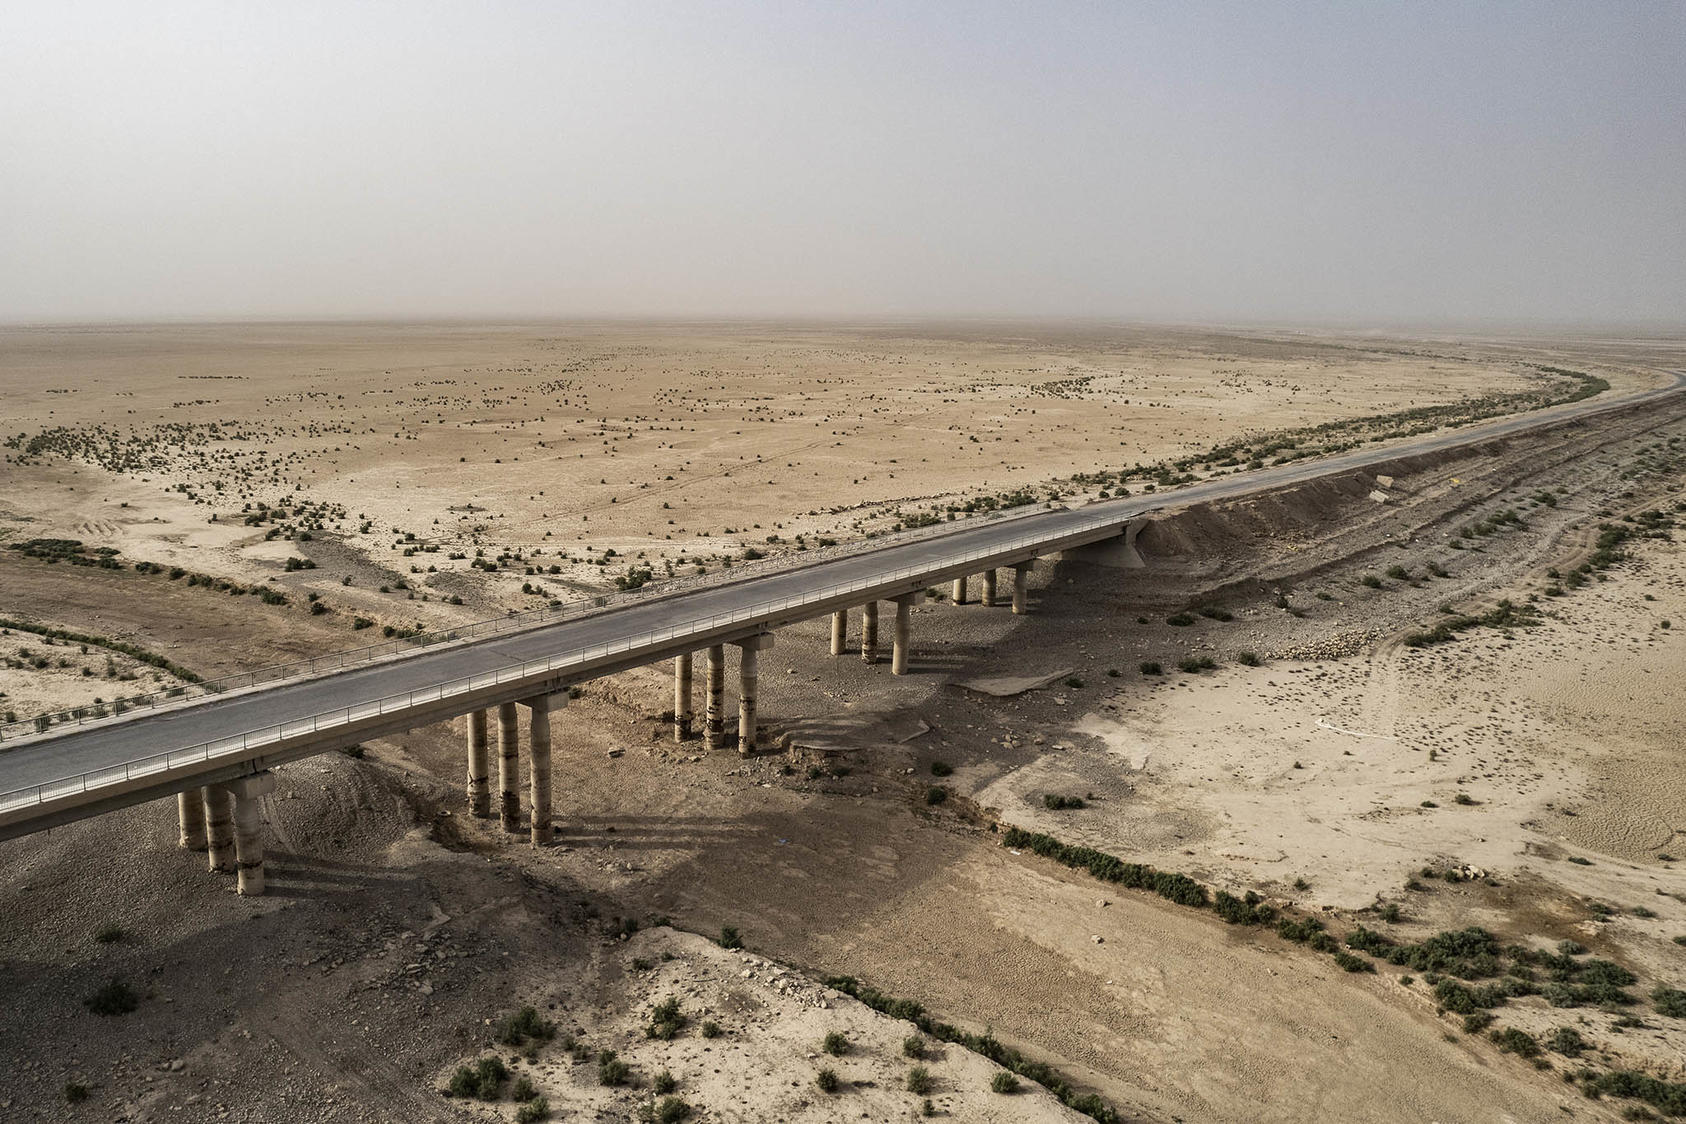 The bridge and causeway that used to run over the waters of the large man-made Lake Hamrin, northeast of Baqubah, Iraq. June 21, 2022. (Bryan Denton/The New York Times)